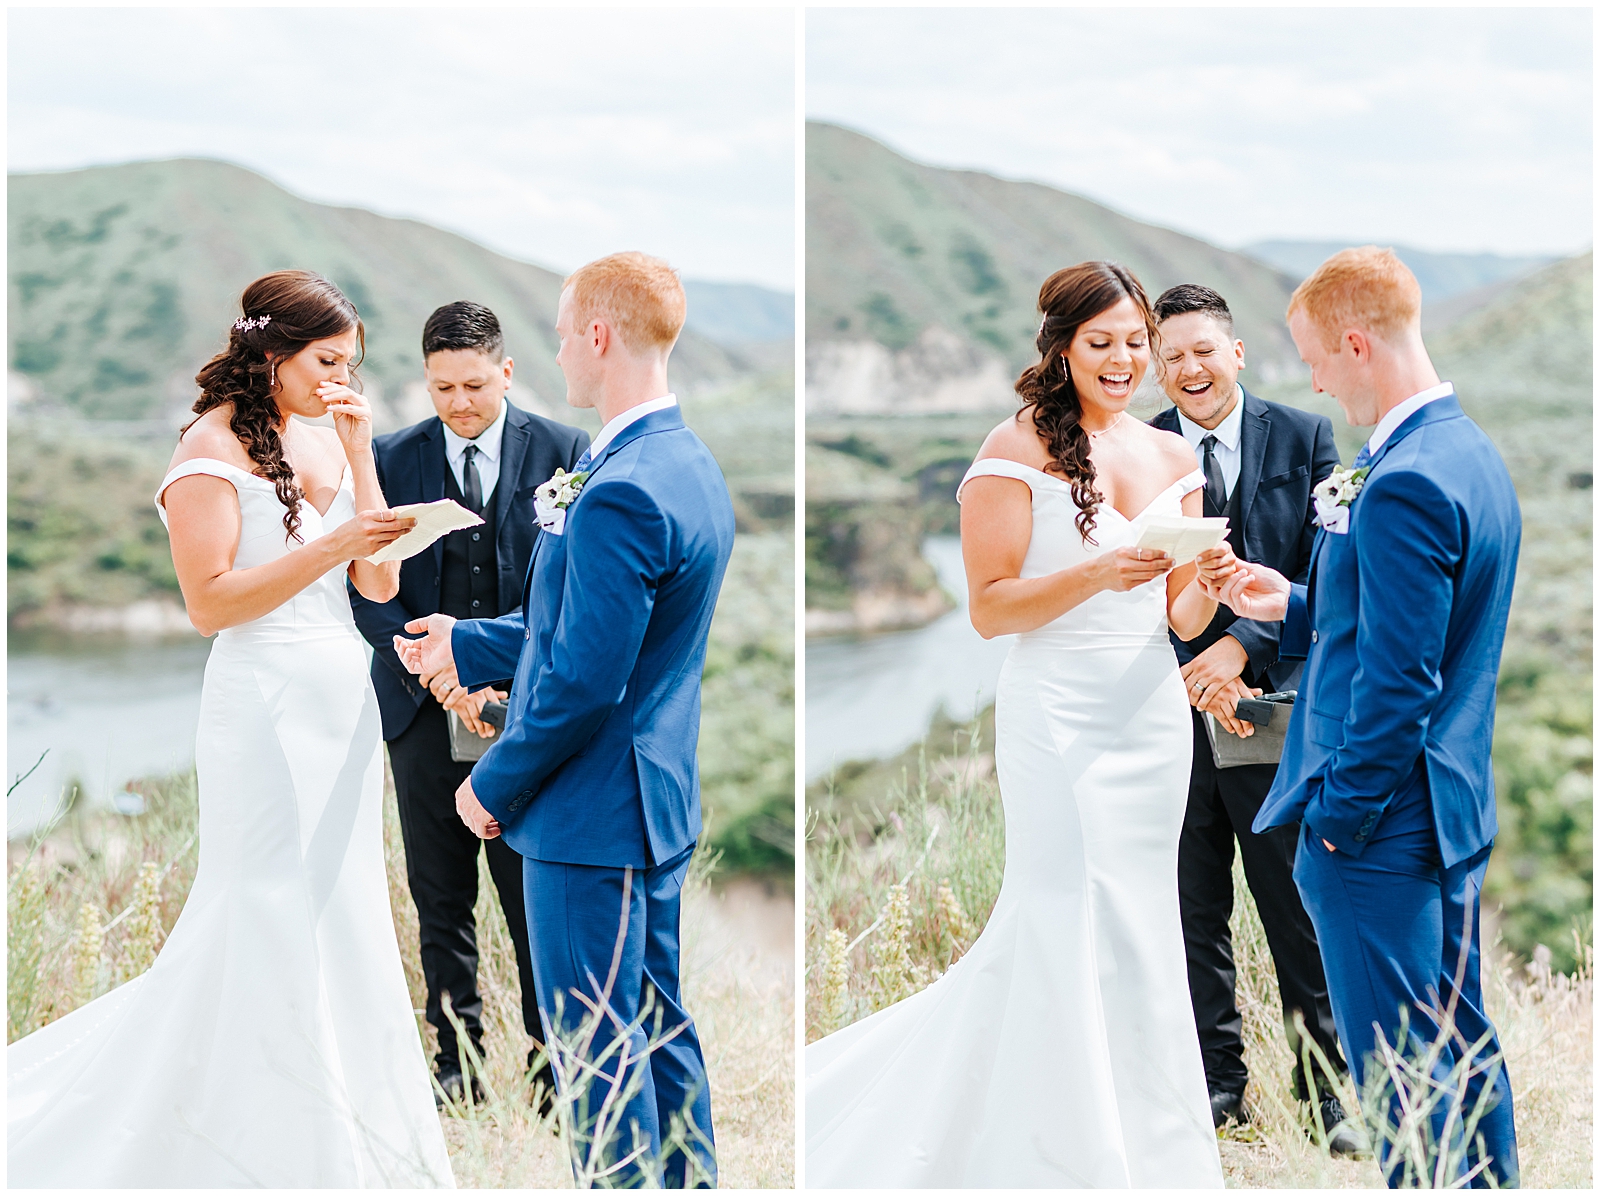 Bride reading her vows at ceremony crying and laughing at gorgeous Boise Foothills Wedding overlooking Lucky Peak Reservoir